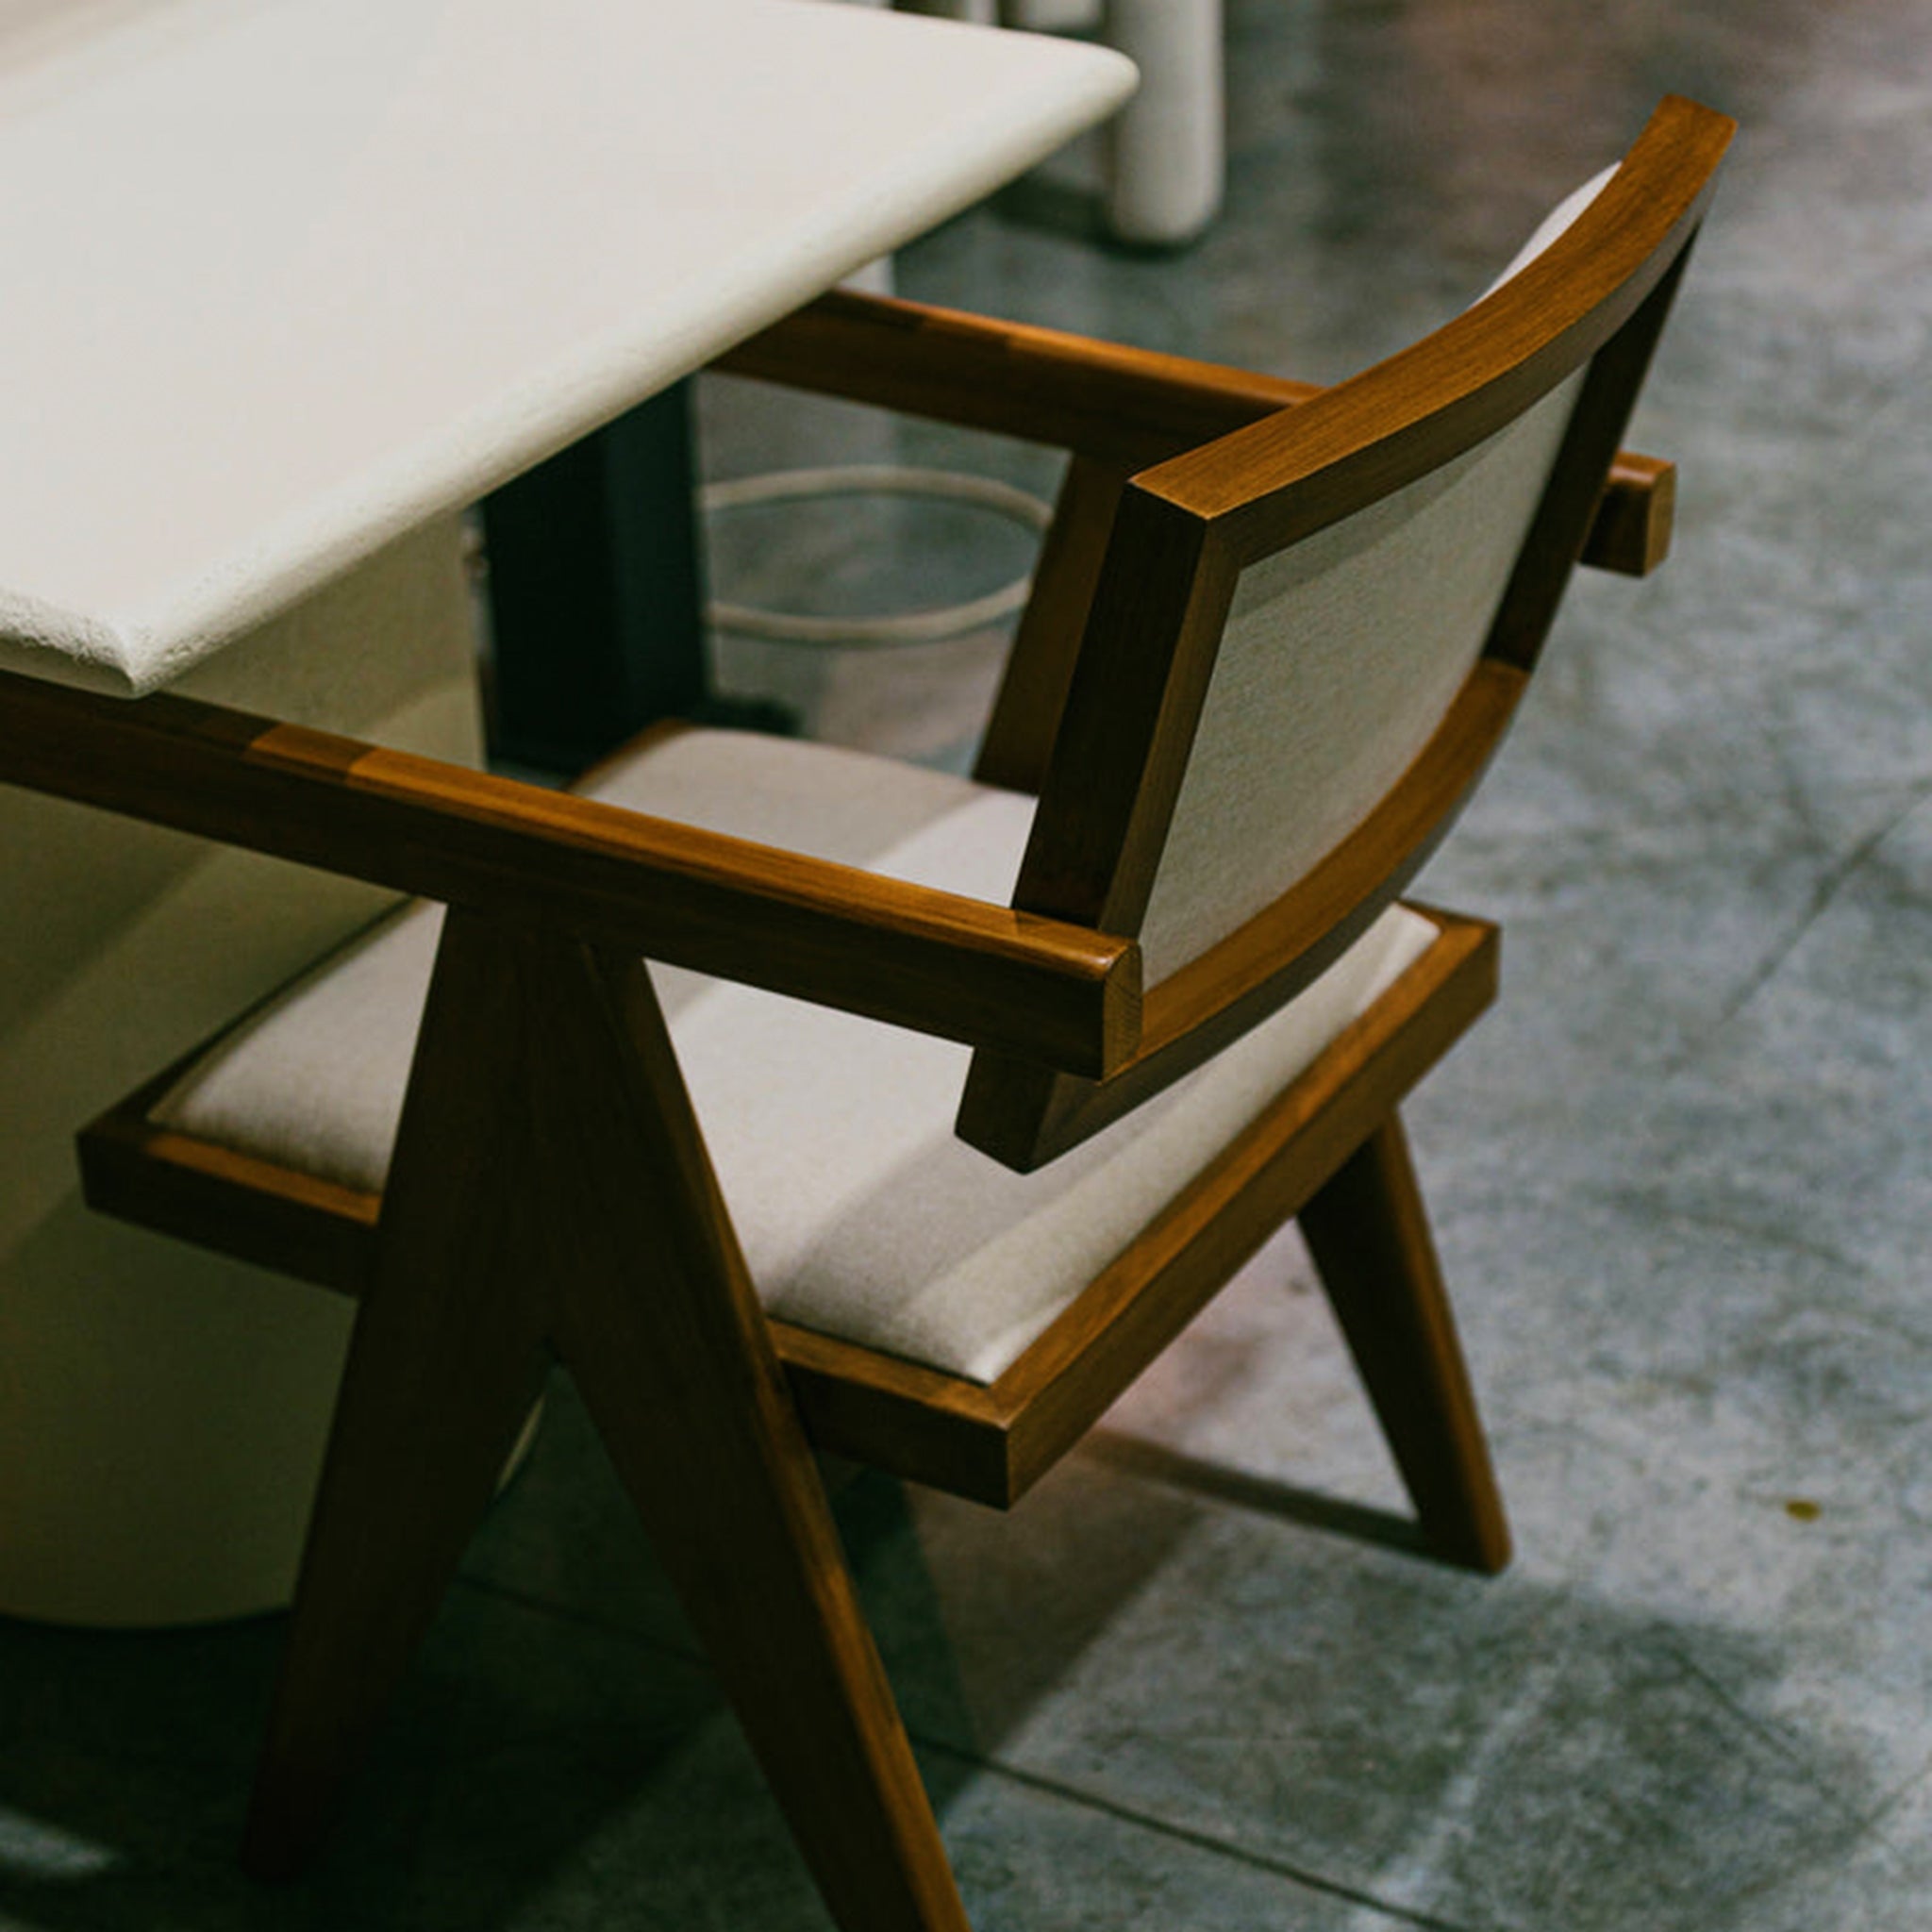 "The Pierre Dining Chair with beige upholstery and wooden structure."